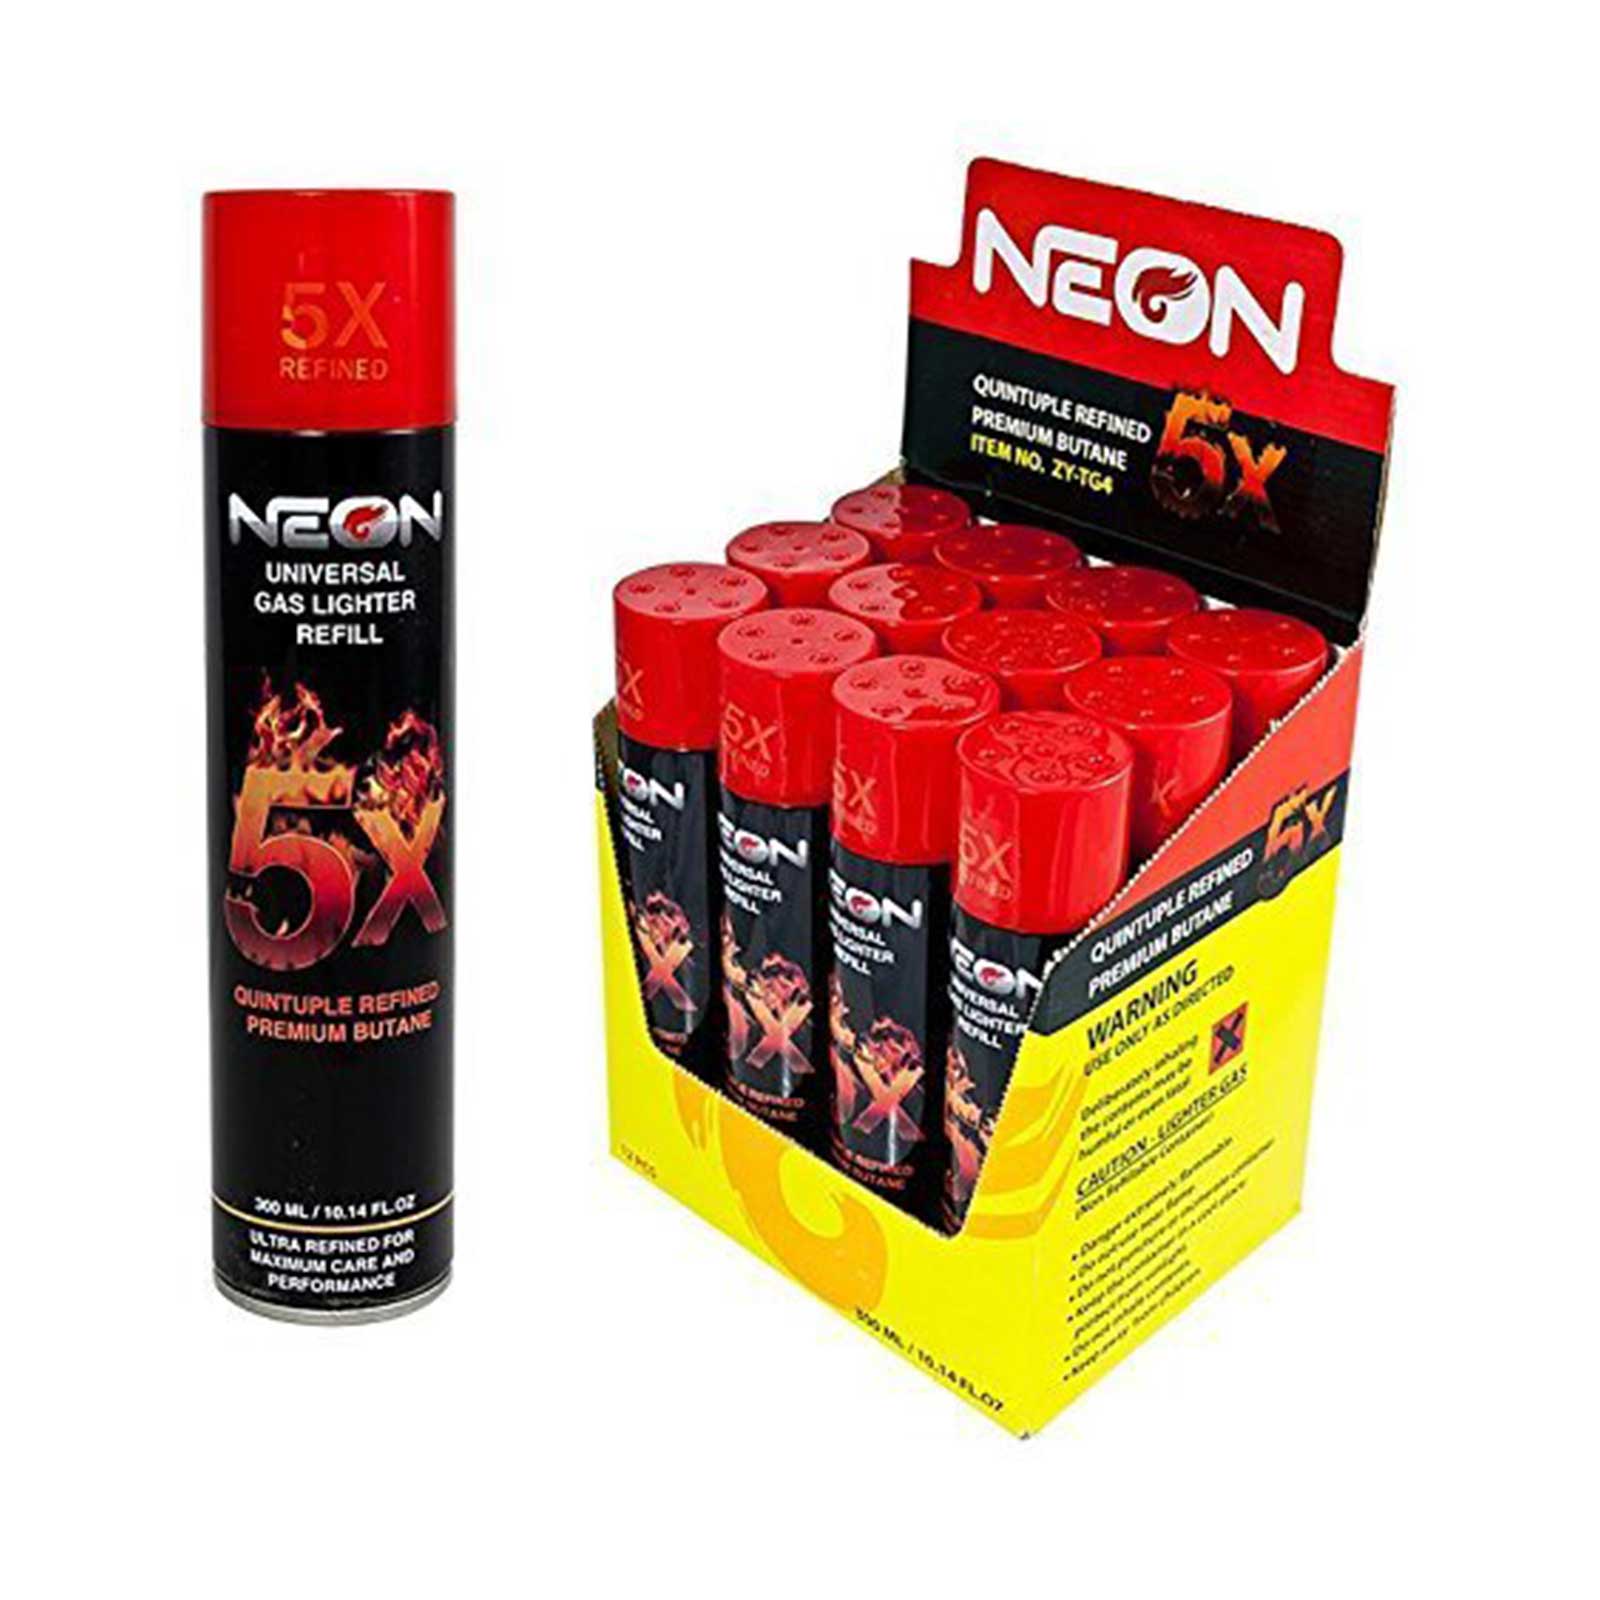 NEON ULTRA REFINED UNIVERSAL 18ML GAS LIGHTER REFILL DISPLAY OF 20